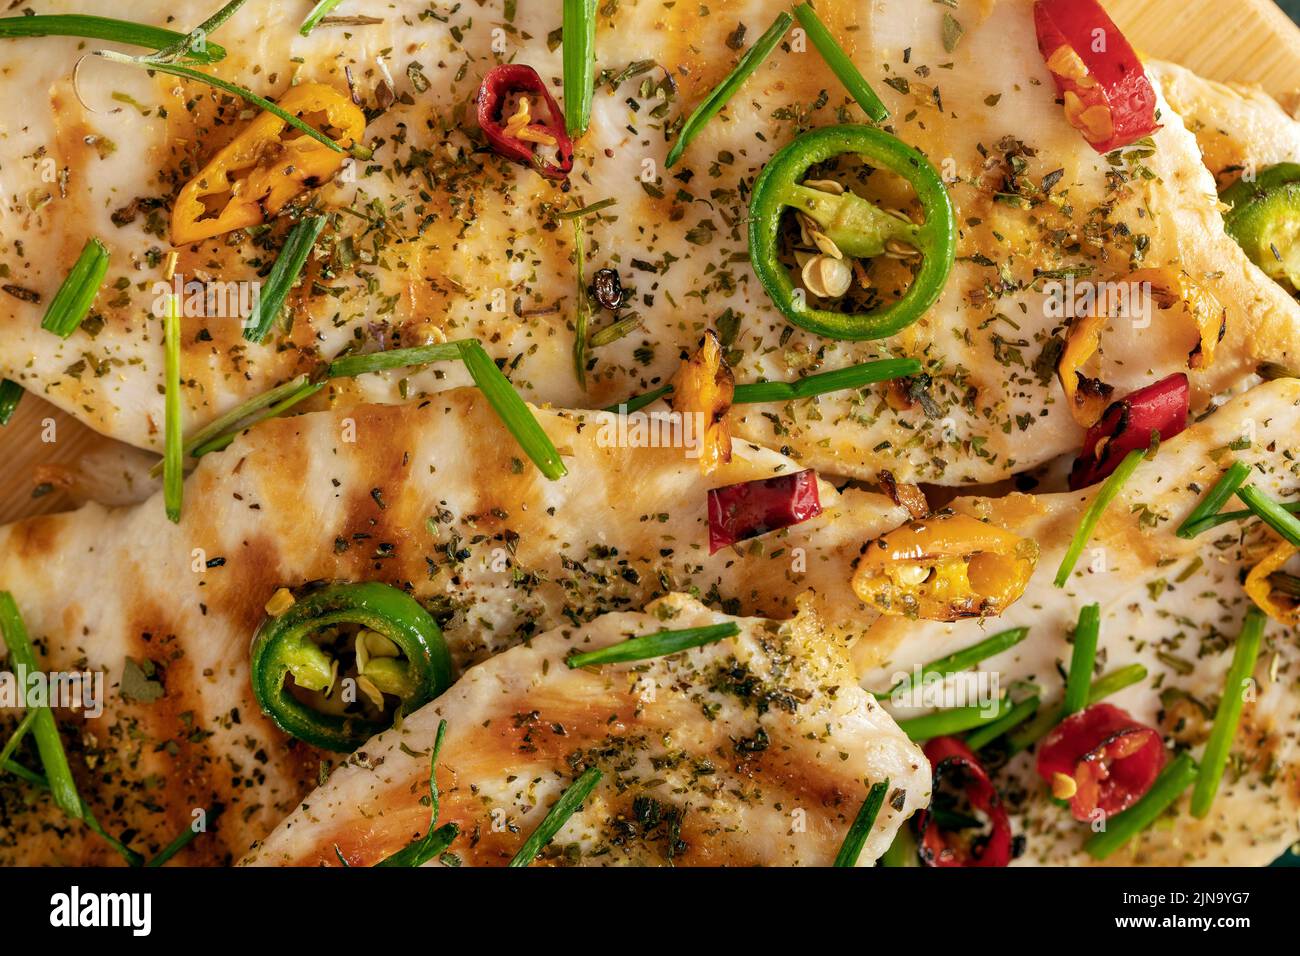 Macro close-up of grilled chicken breast cooked with three different colors chili peppers and aromatic herbs. Stock Photo